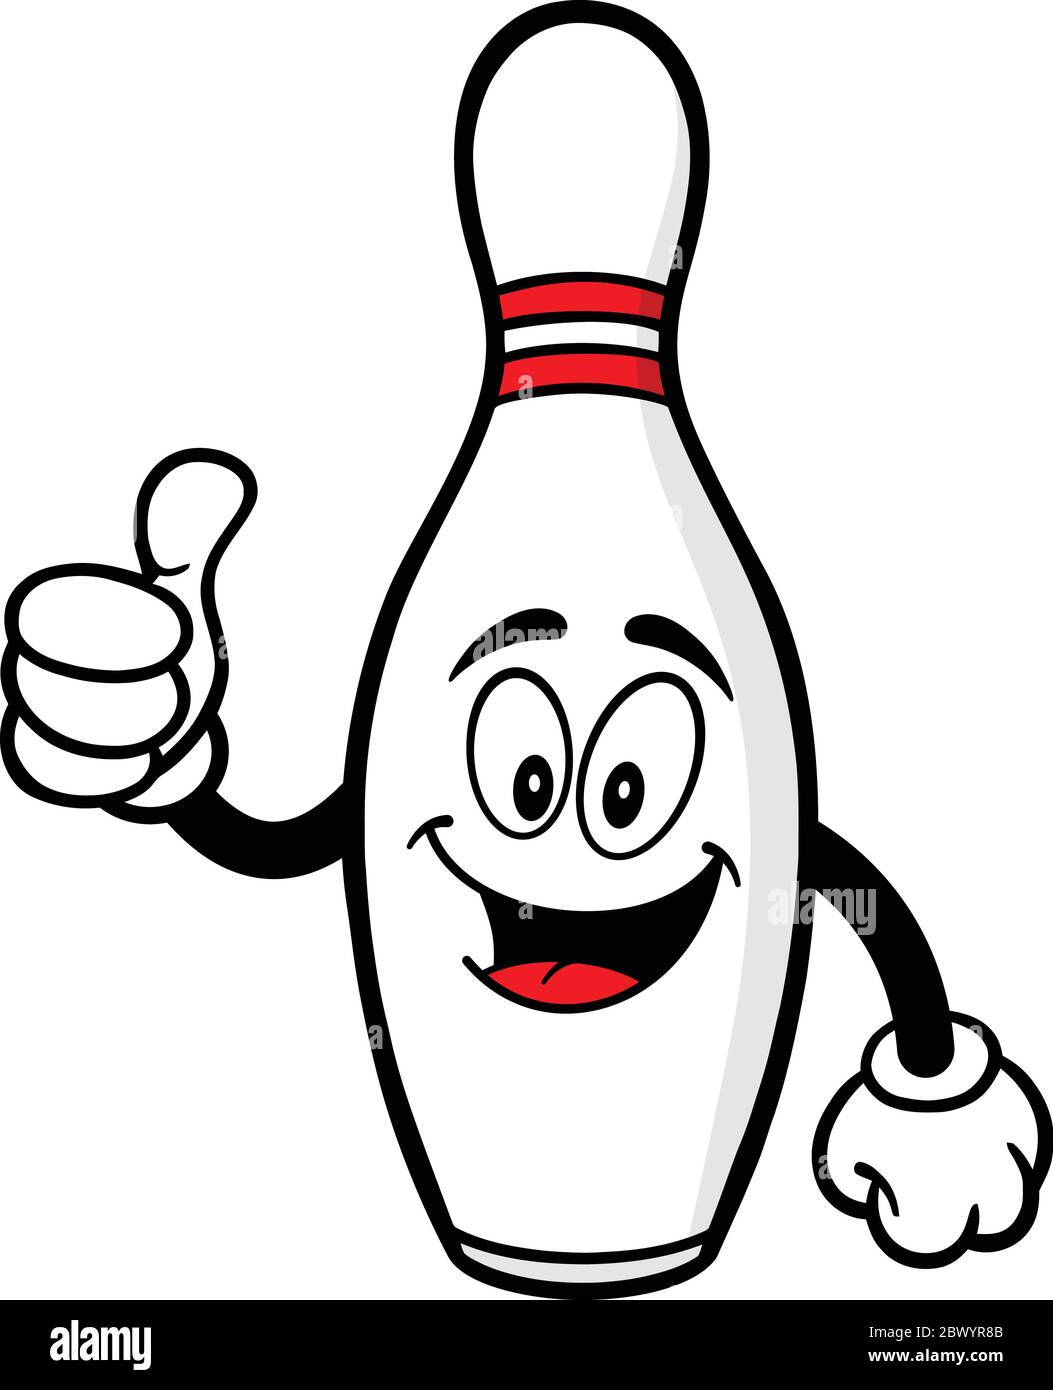 Bowling Pin with Thumbs Up- A Cartoon Illustration of a Bowling Pin ...